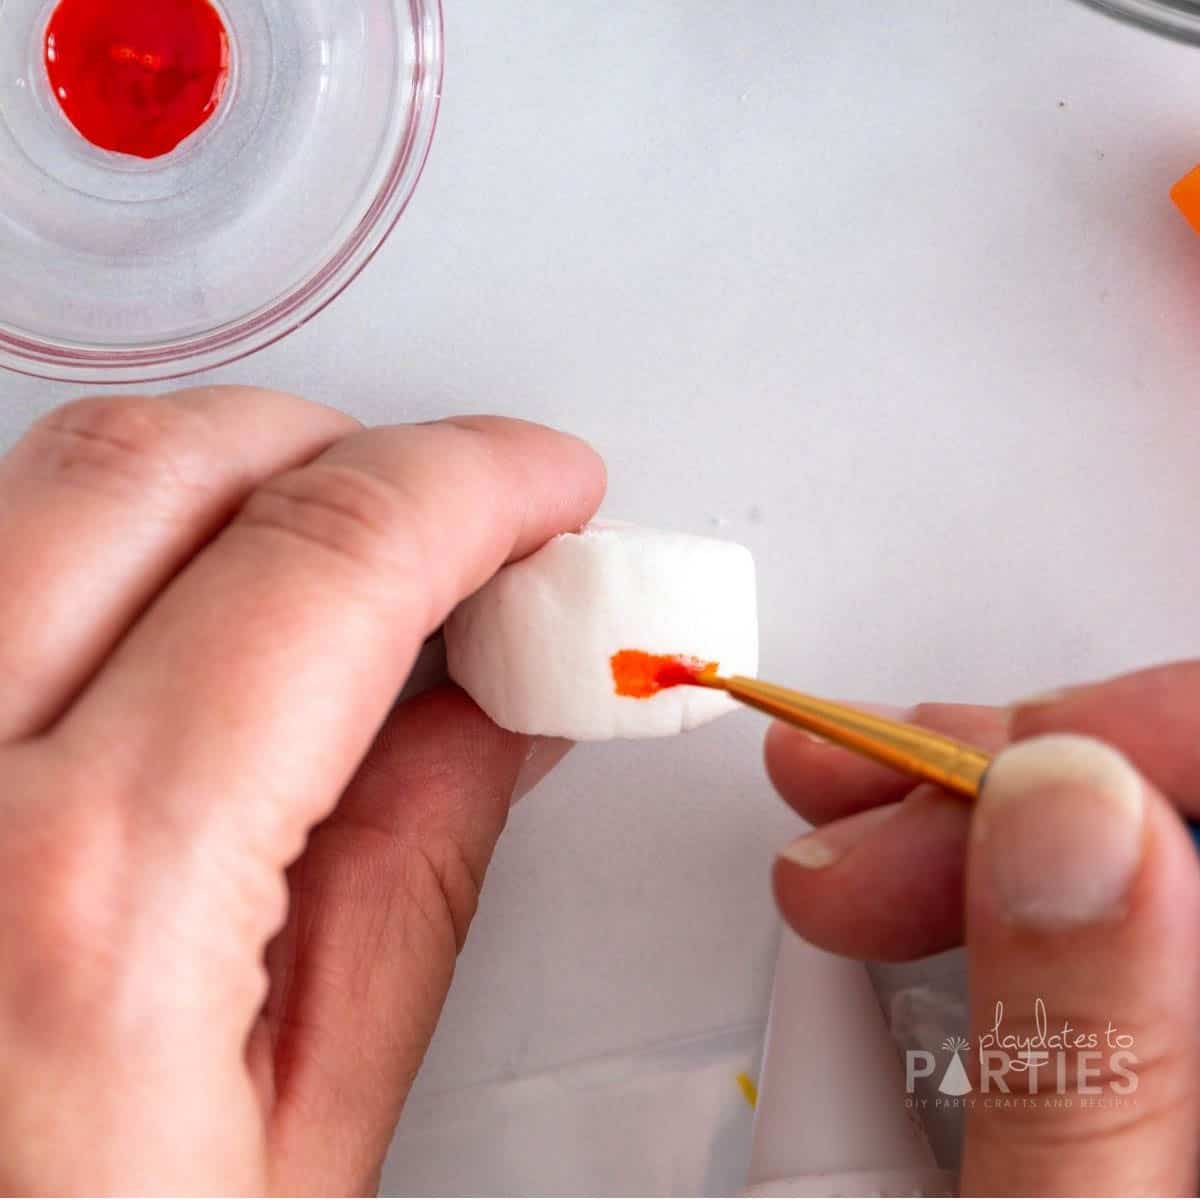 A woman's hand painting an orange carrot nose onto a marshmallow with food coloring.